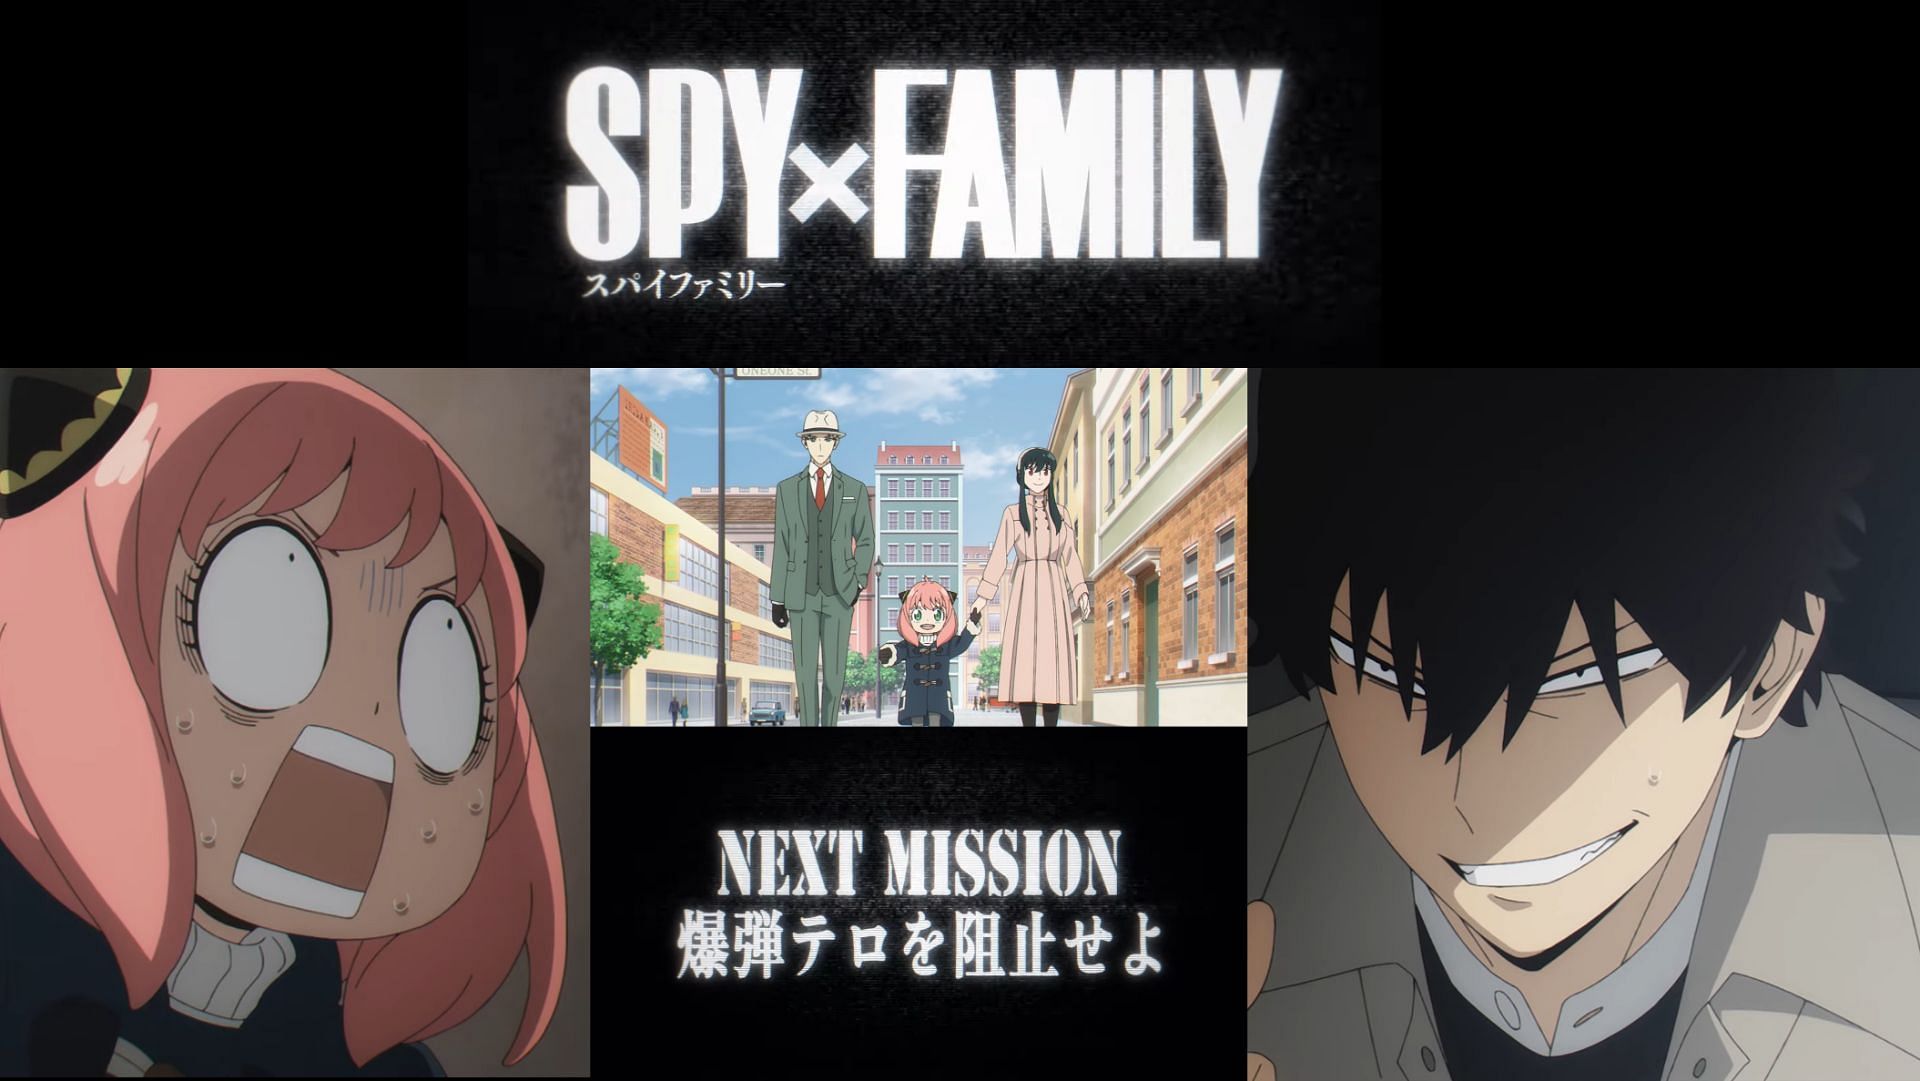 Spy X Family Part 2: Teaser Trailer Out! Release Date & More To Know